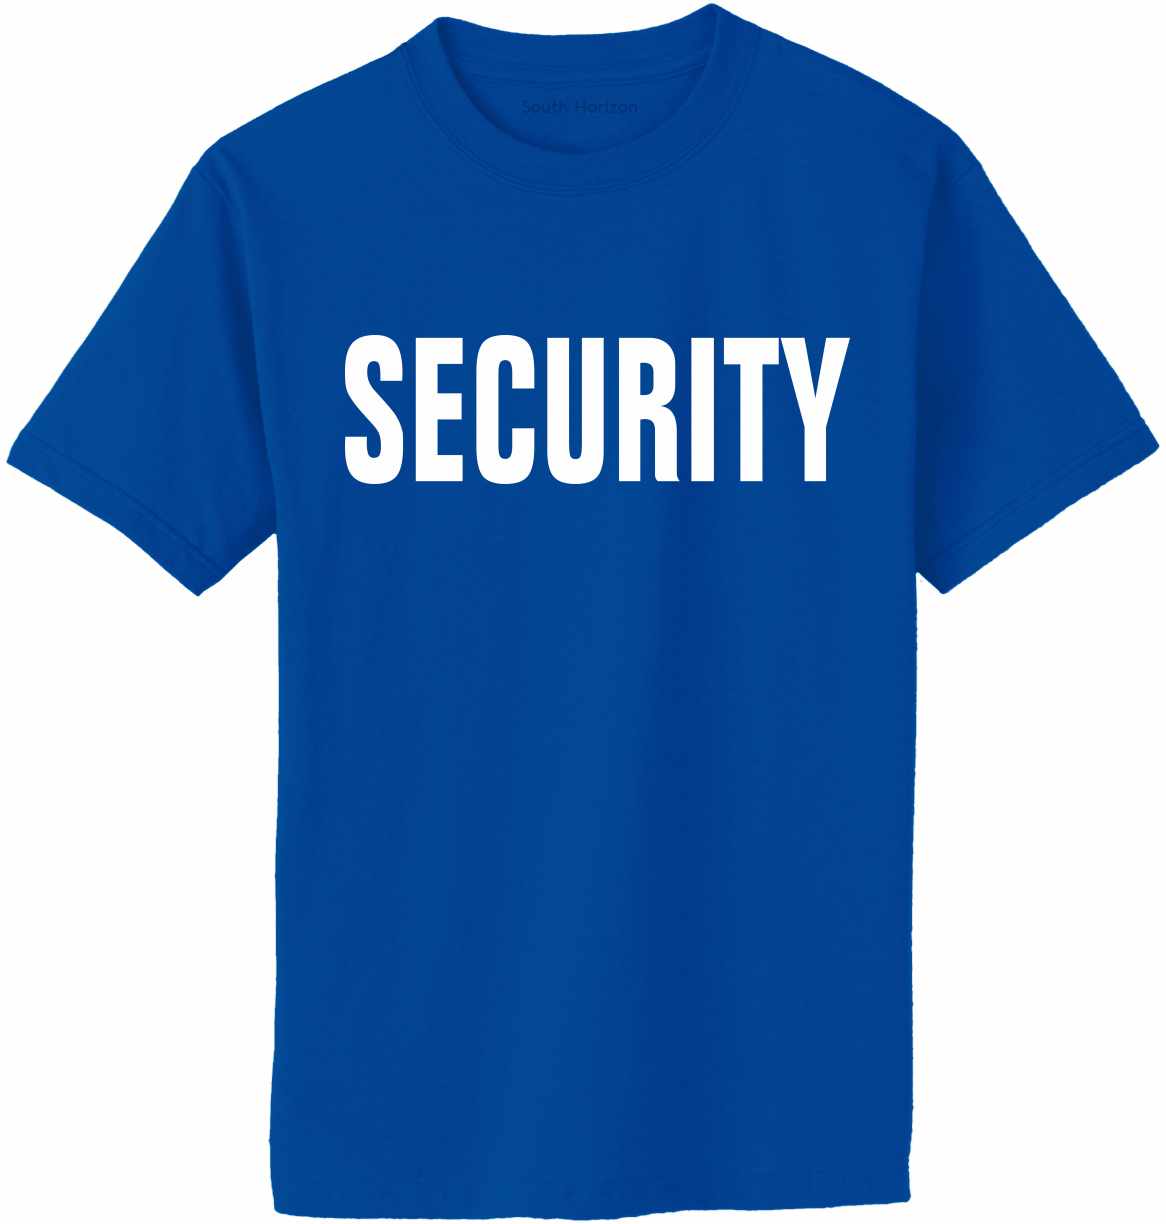 SECURITY (2 sided) Adult T-Shirt (#34-1)